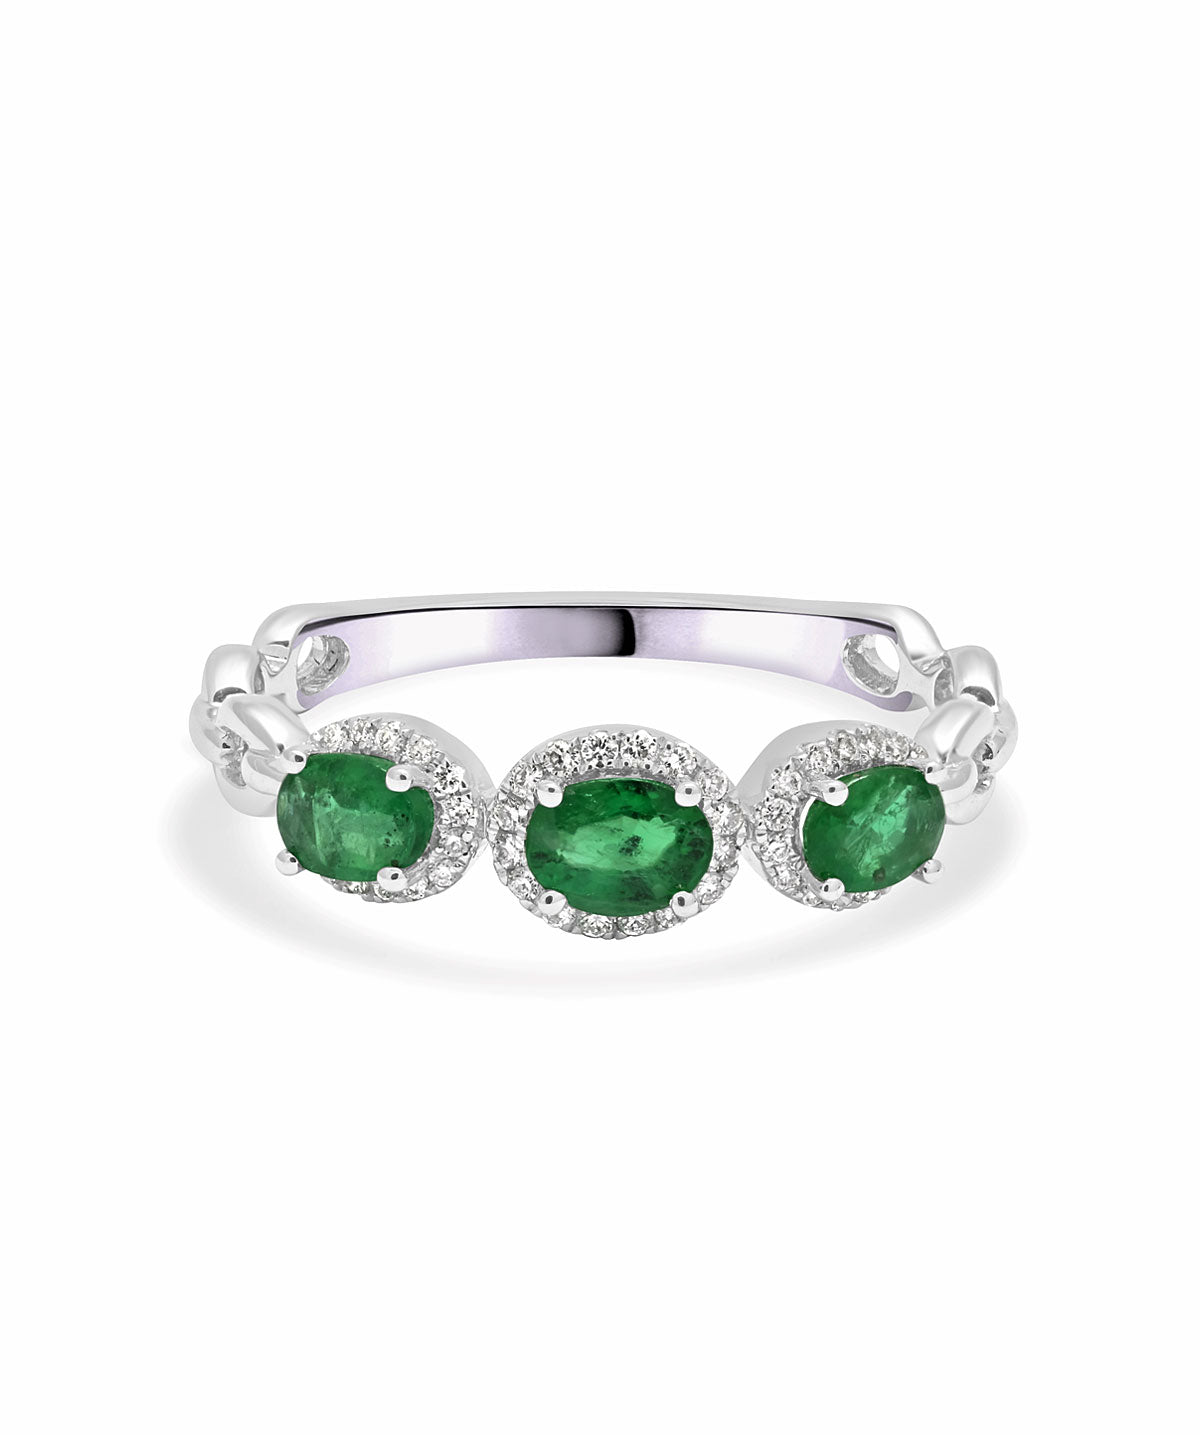 14K White Gold Emerald and Diamond Halo Band Ring